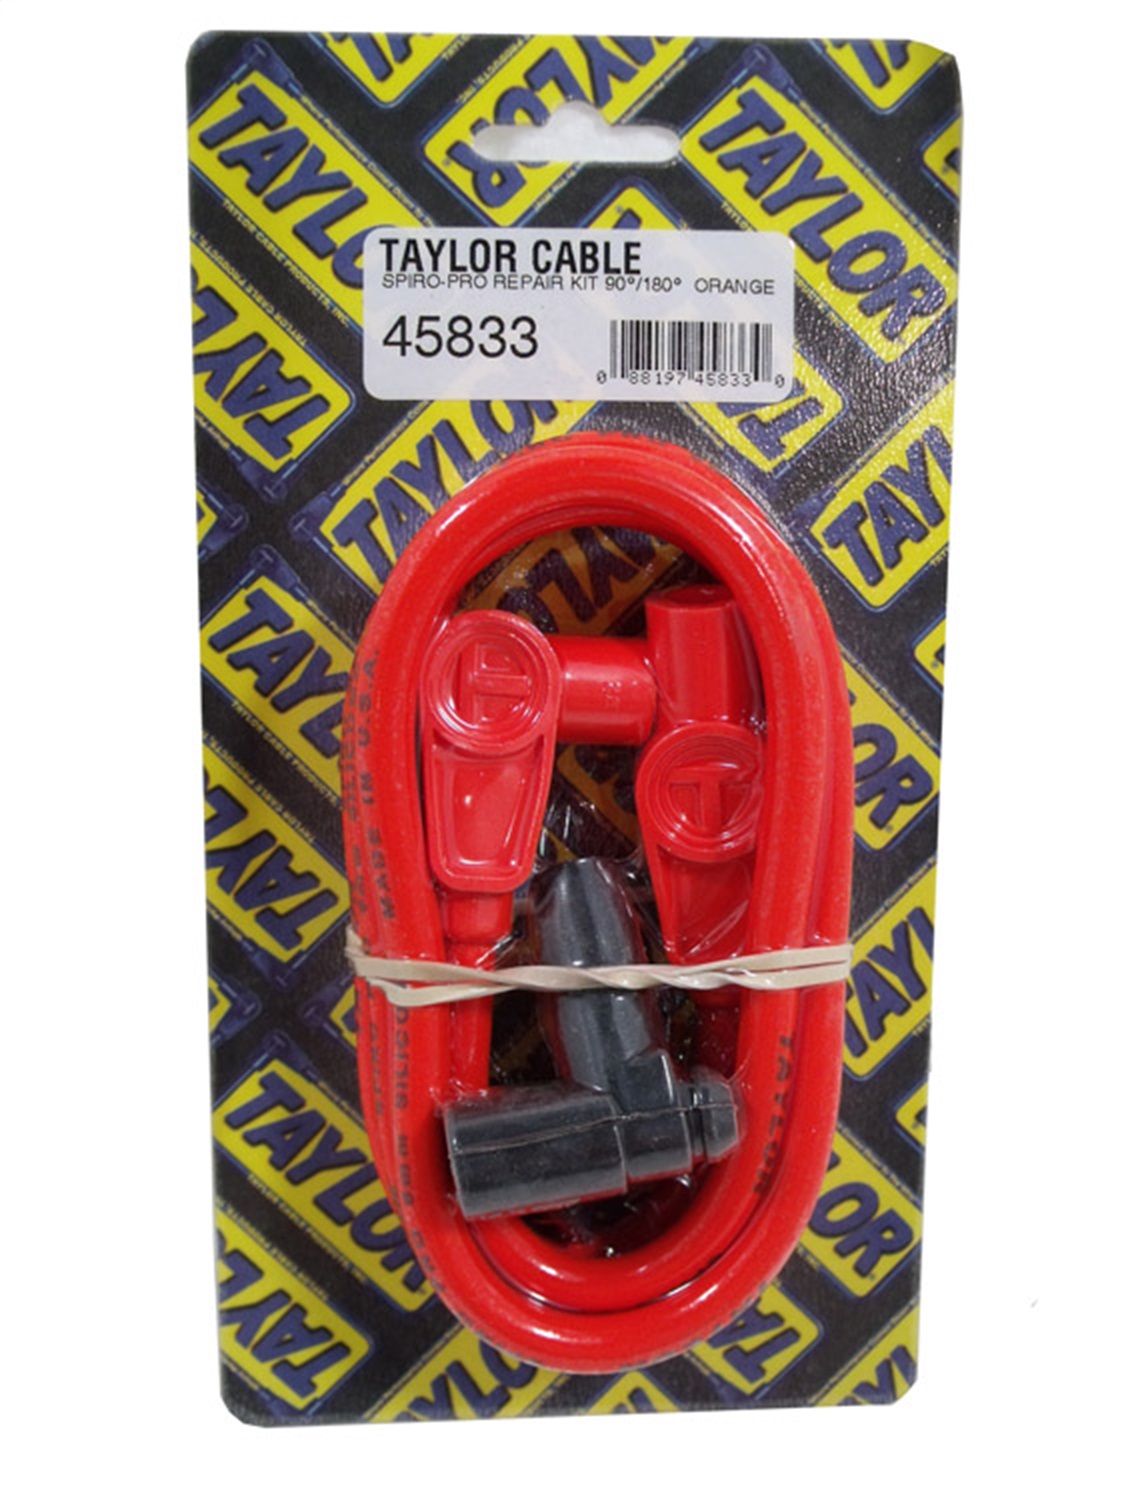 Taylor Cable Taylor Cable 45833 8mm Spiro Pro; Spark Plug Wire Repair Kit